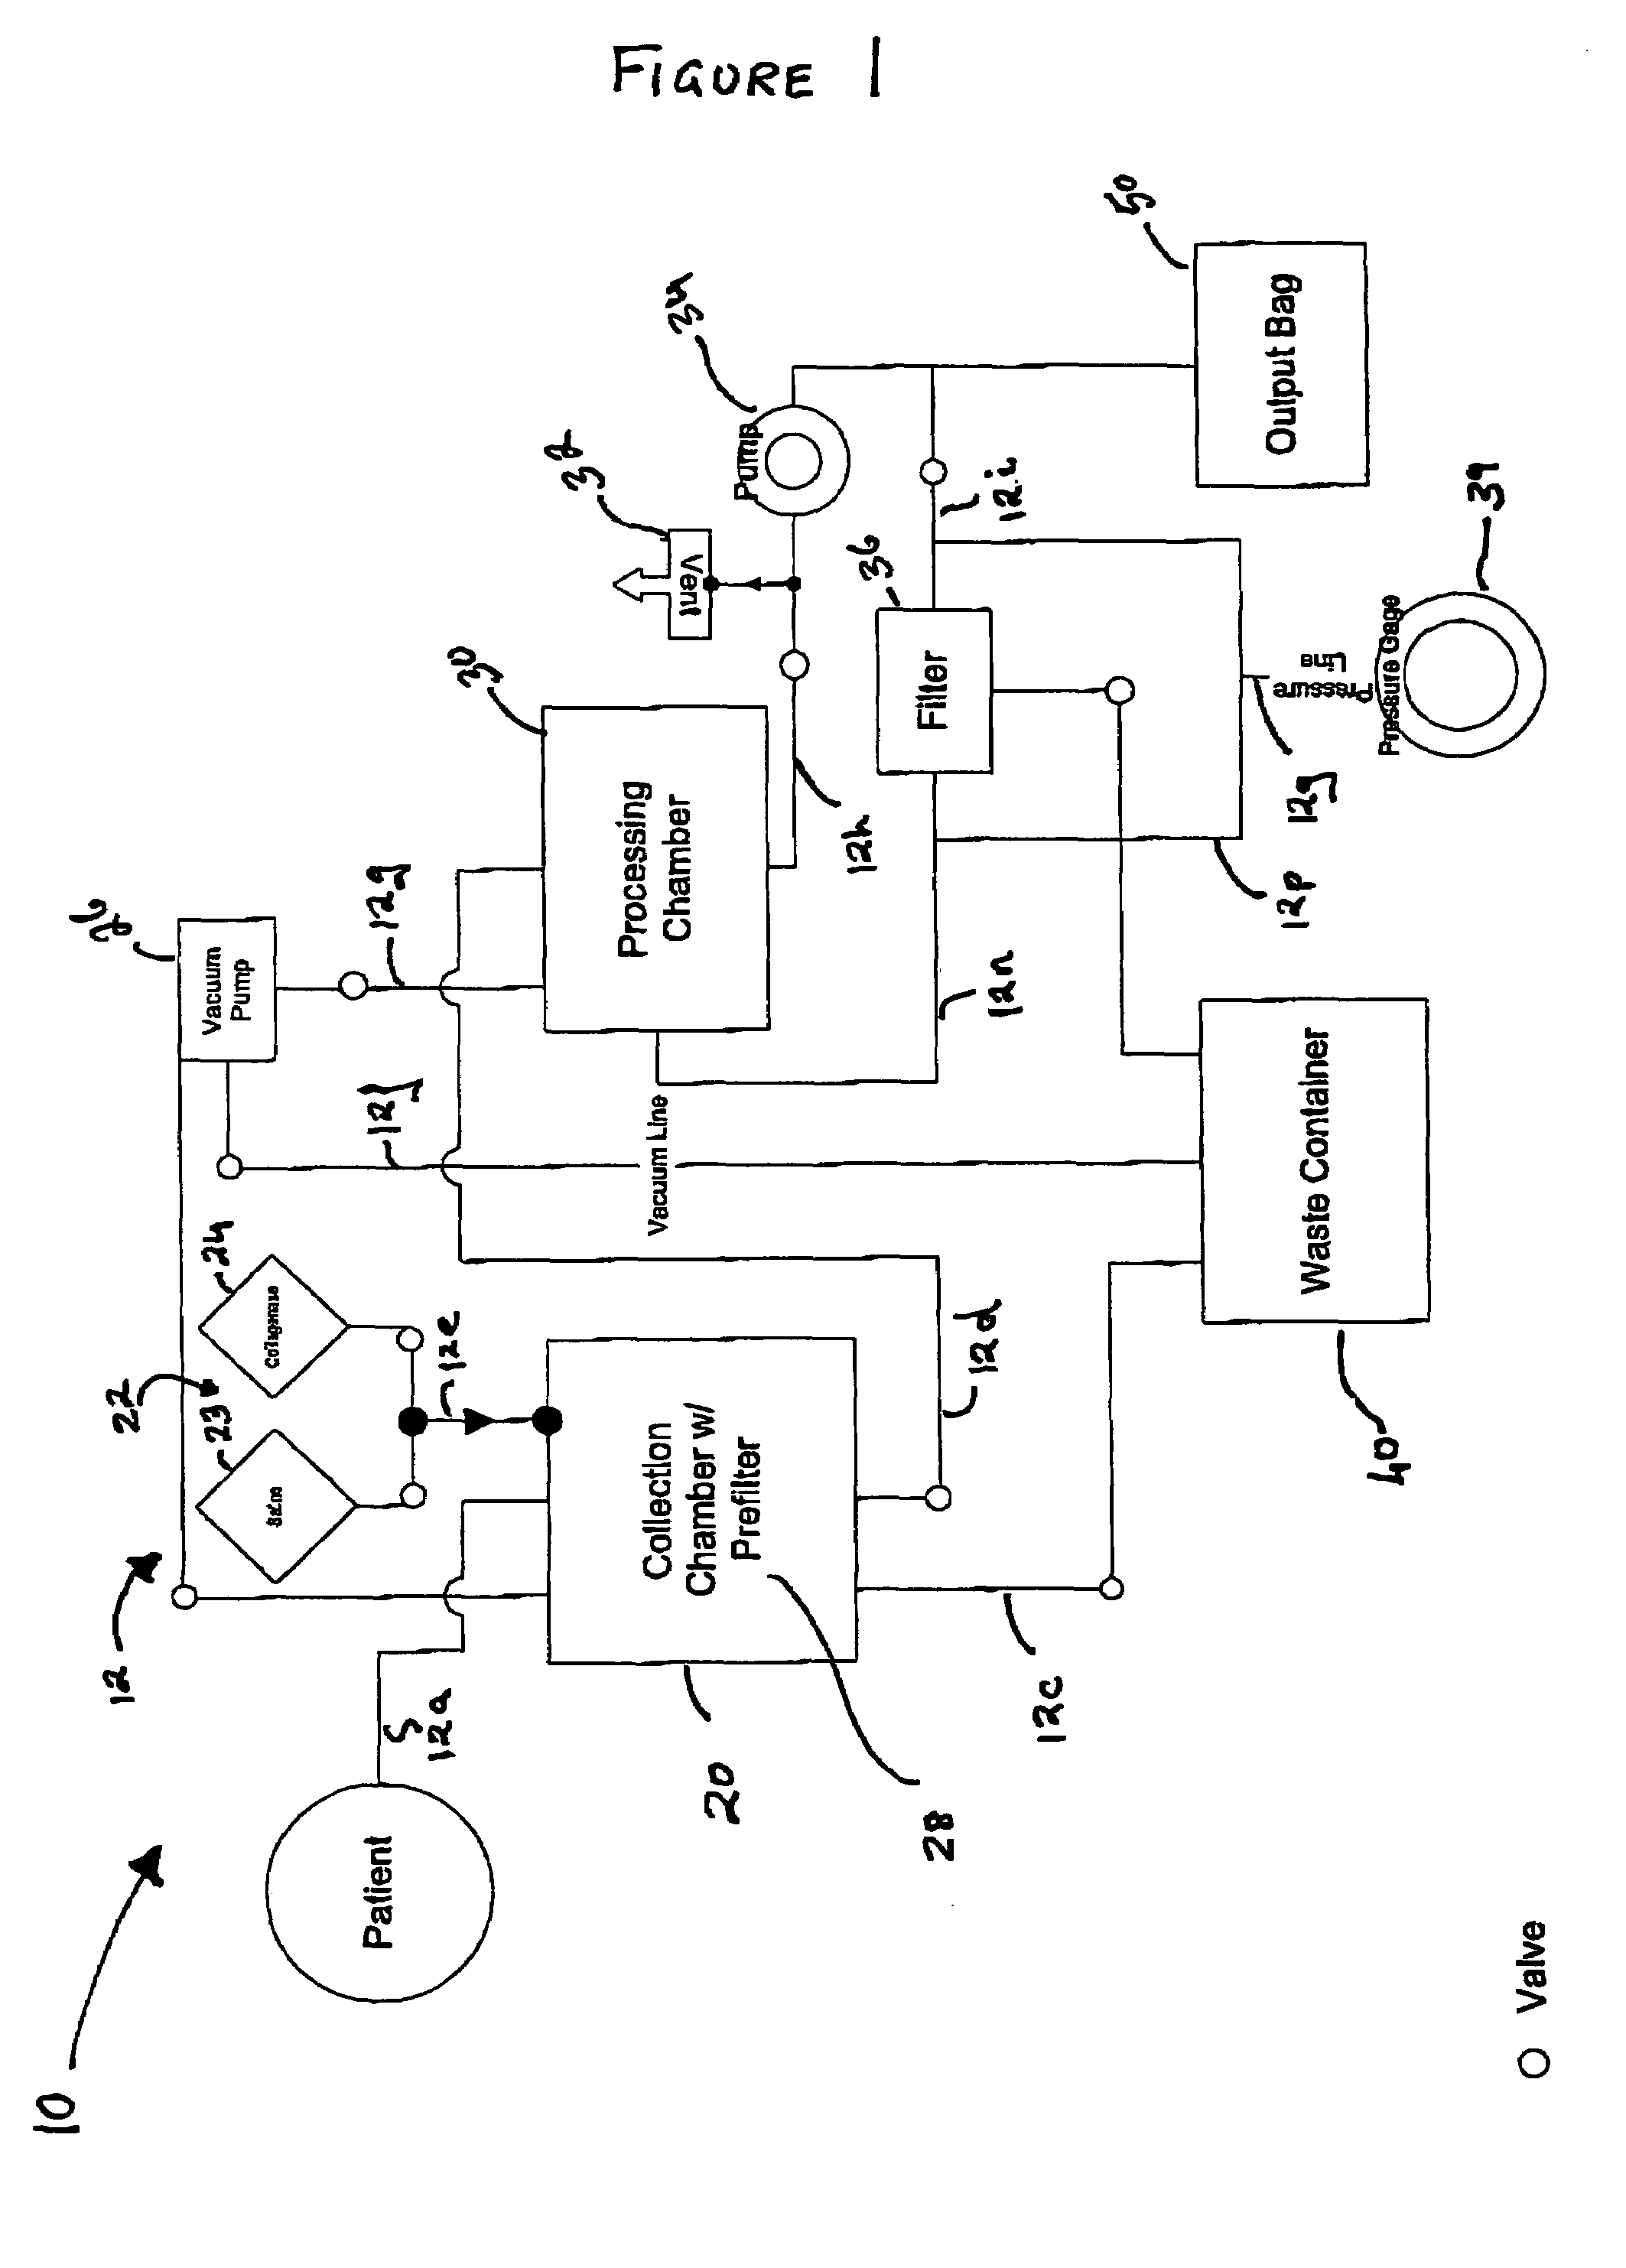 Methods of using adipose tissue-derived cells in augmenting autologous fat transfer